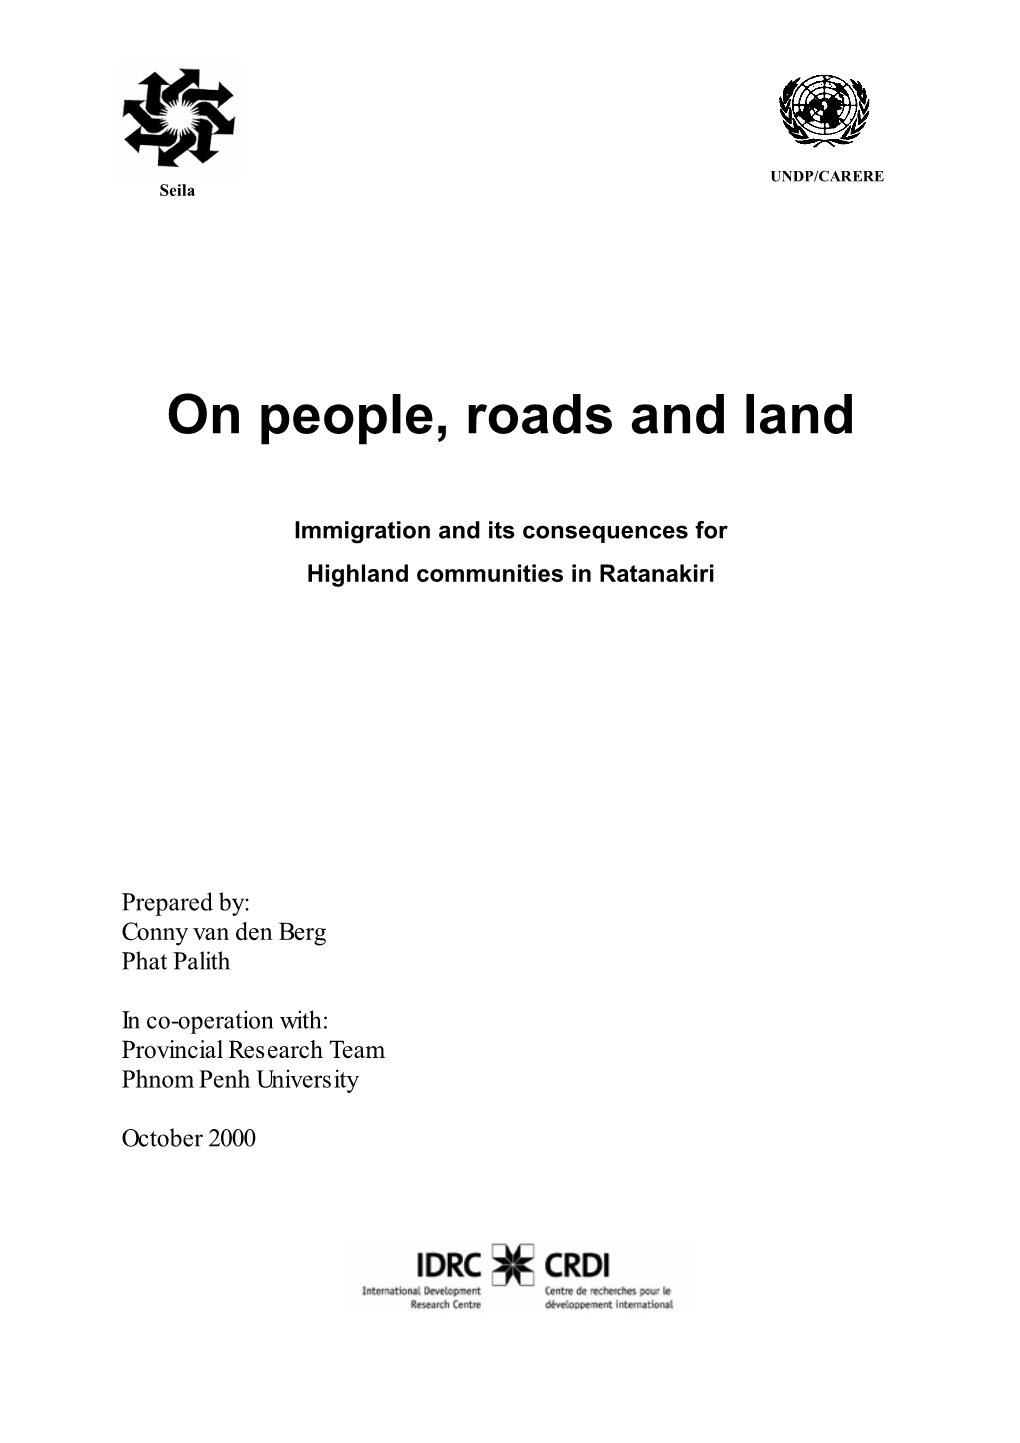 On People, Roads and Land